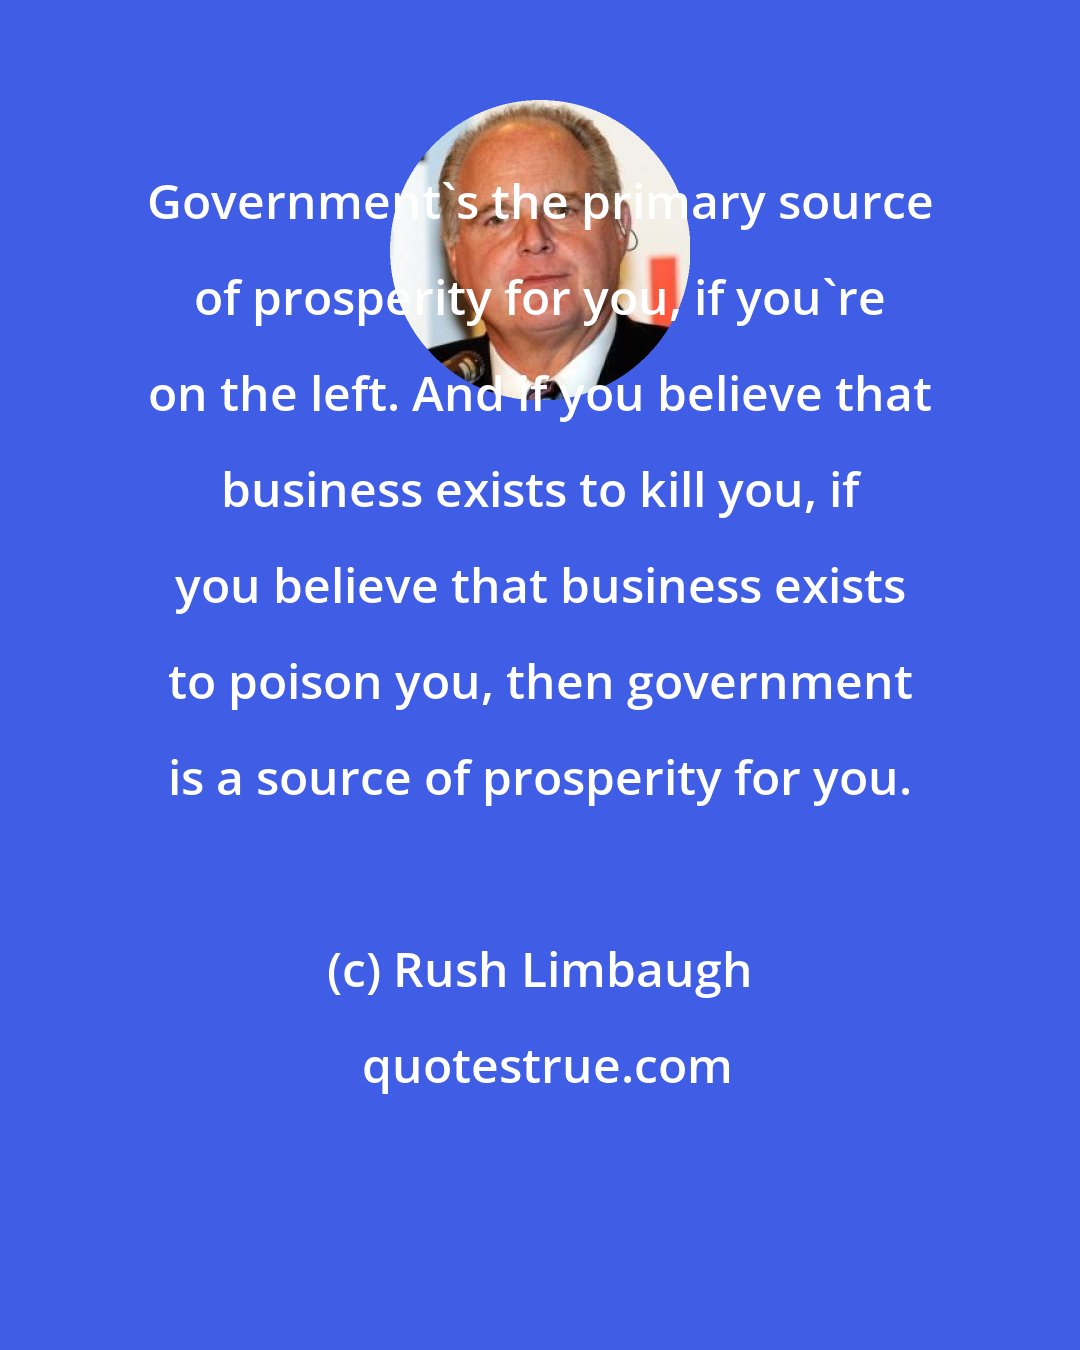 Rush Limbaugh: Government's the primary source of prosperity for you, if you're on the left. And if you believe that business exists to kill you, if you believe that business exists to poison you, then government is a source of prosperity for you.